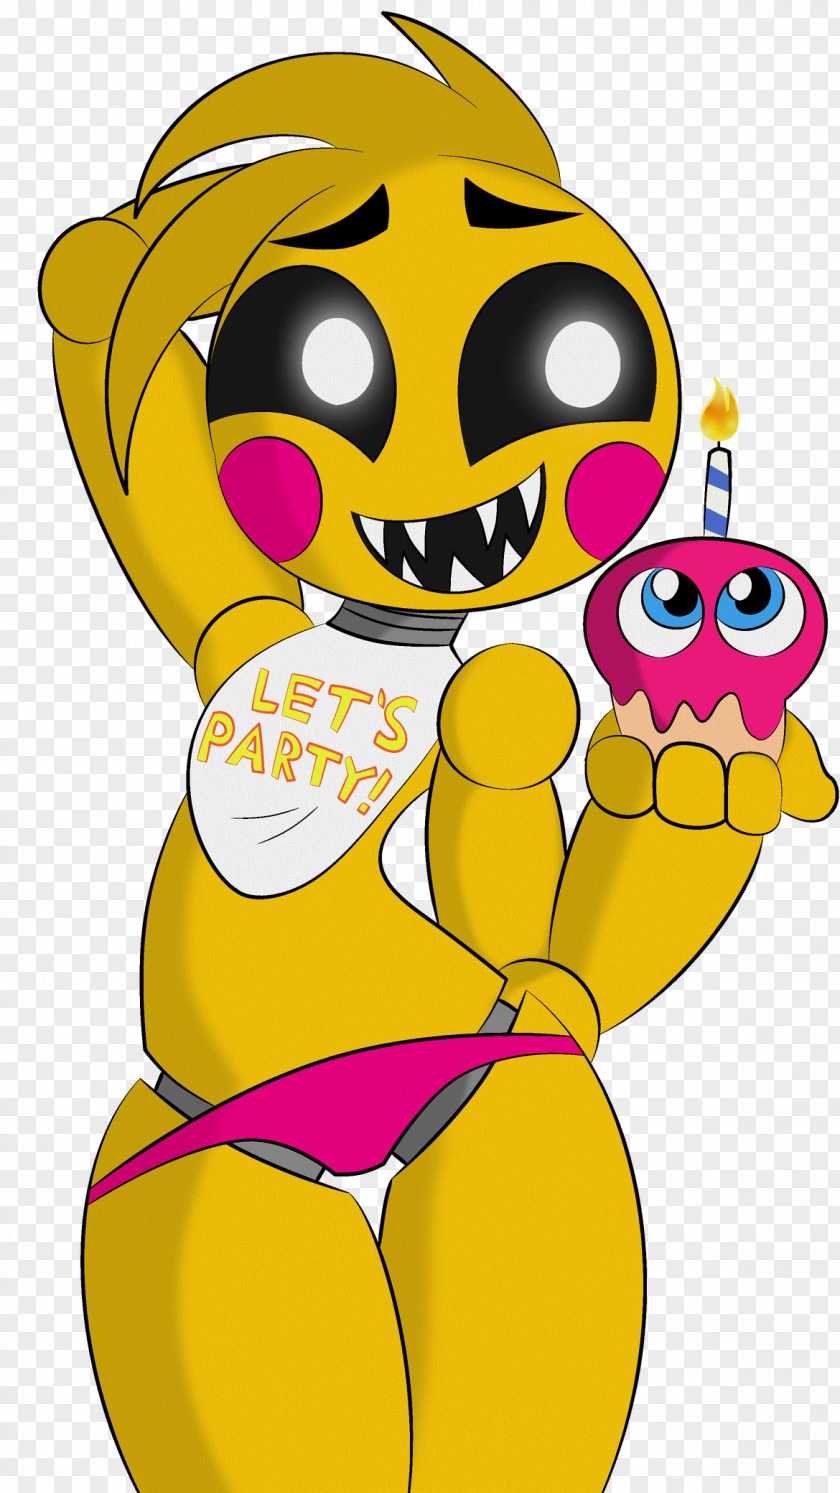 Work Of Art Fan Five Nights At Freddy's PNG of art at Freddy's, chica sexy clipart PNG